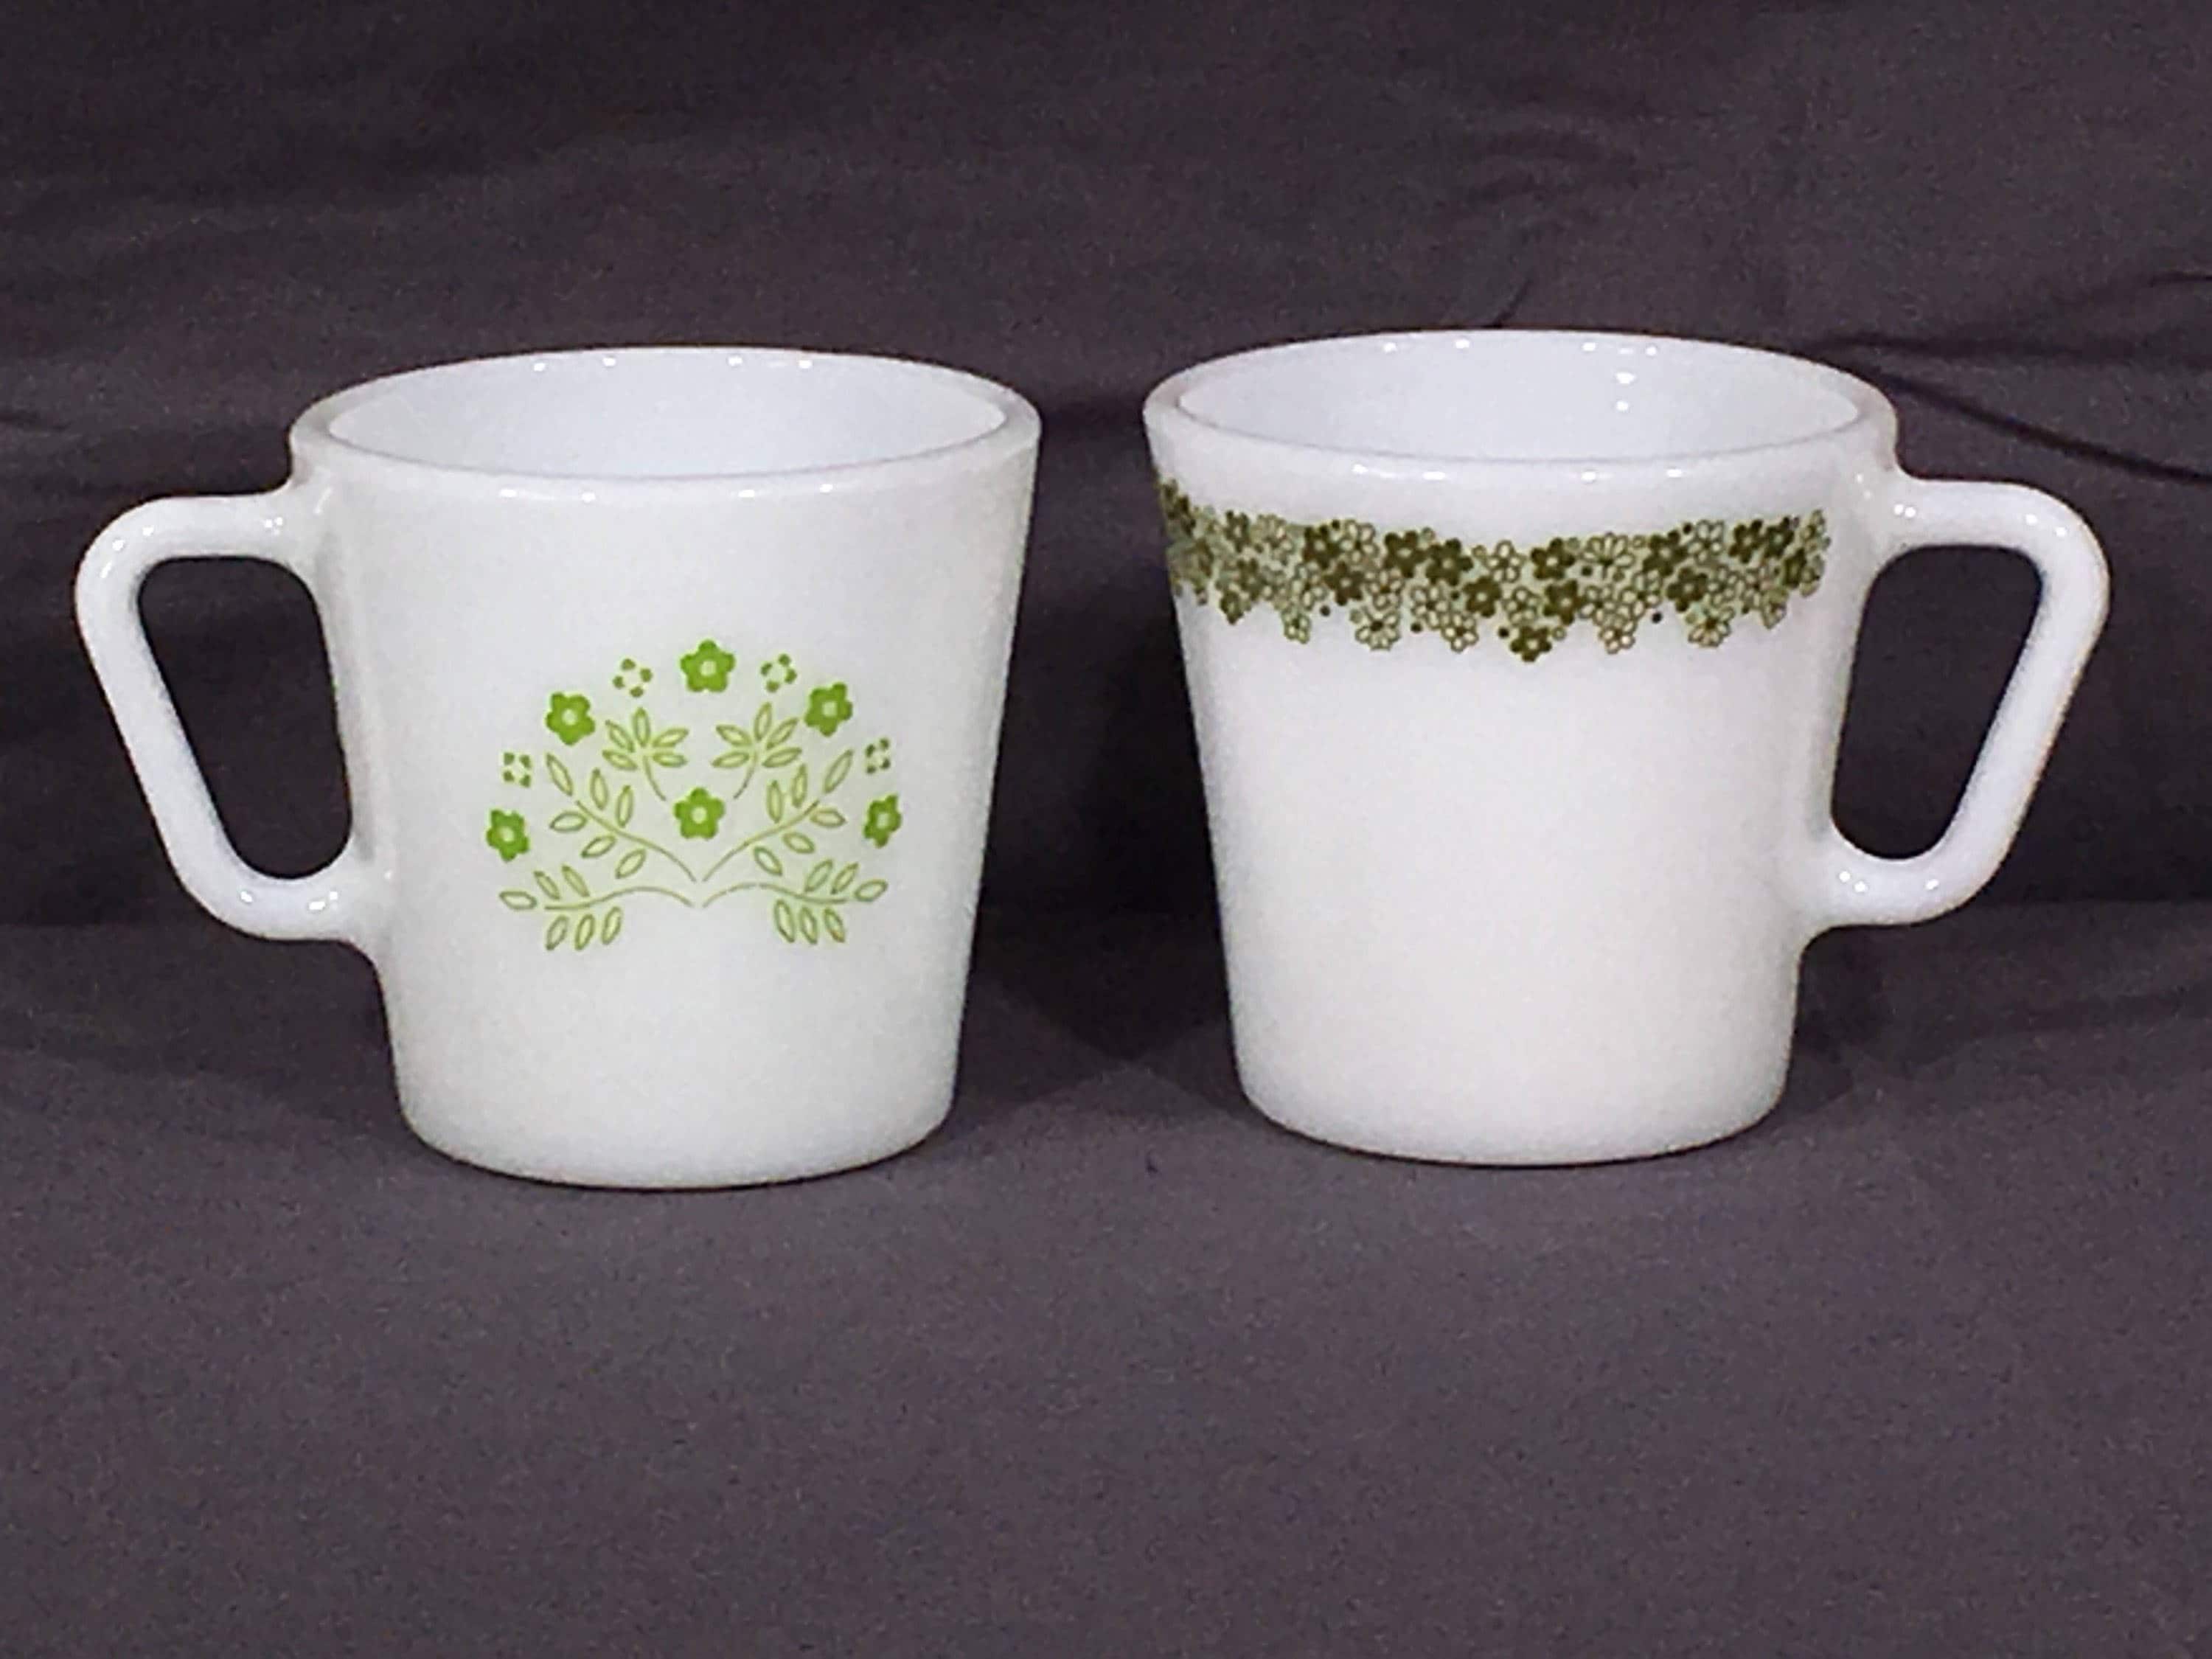 Vintage Pyrex Mugs, Decorative Green & White Coffee Cups, Crazy Daisy